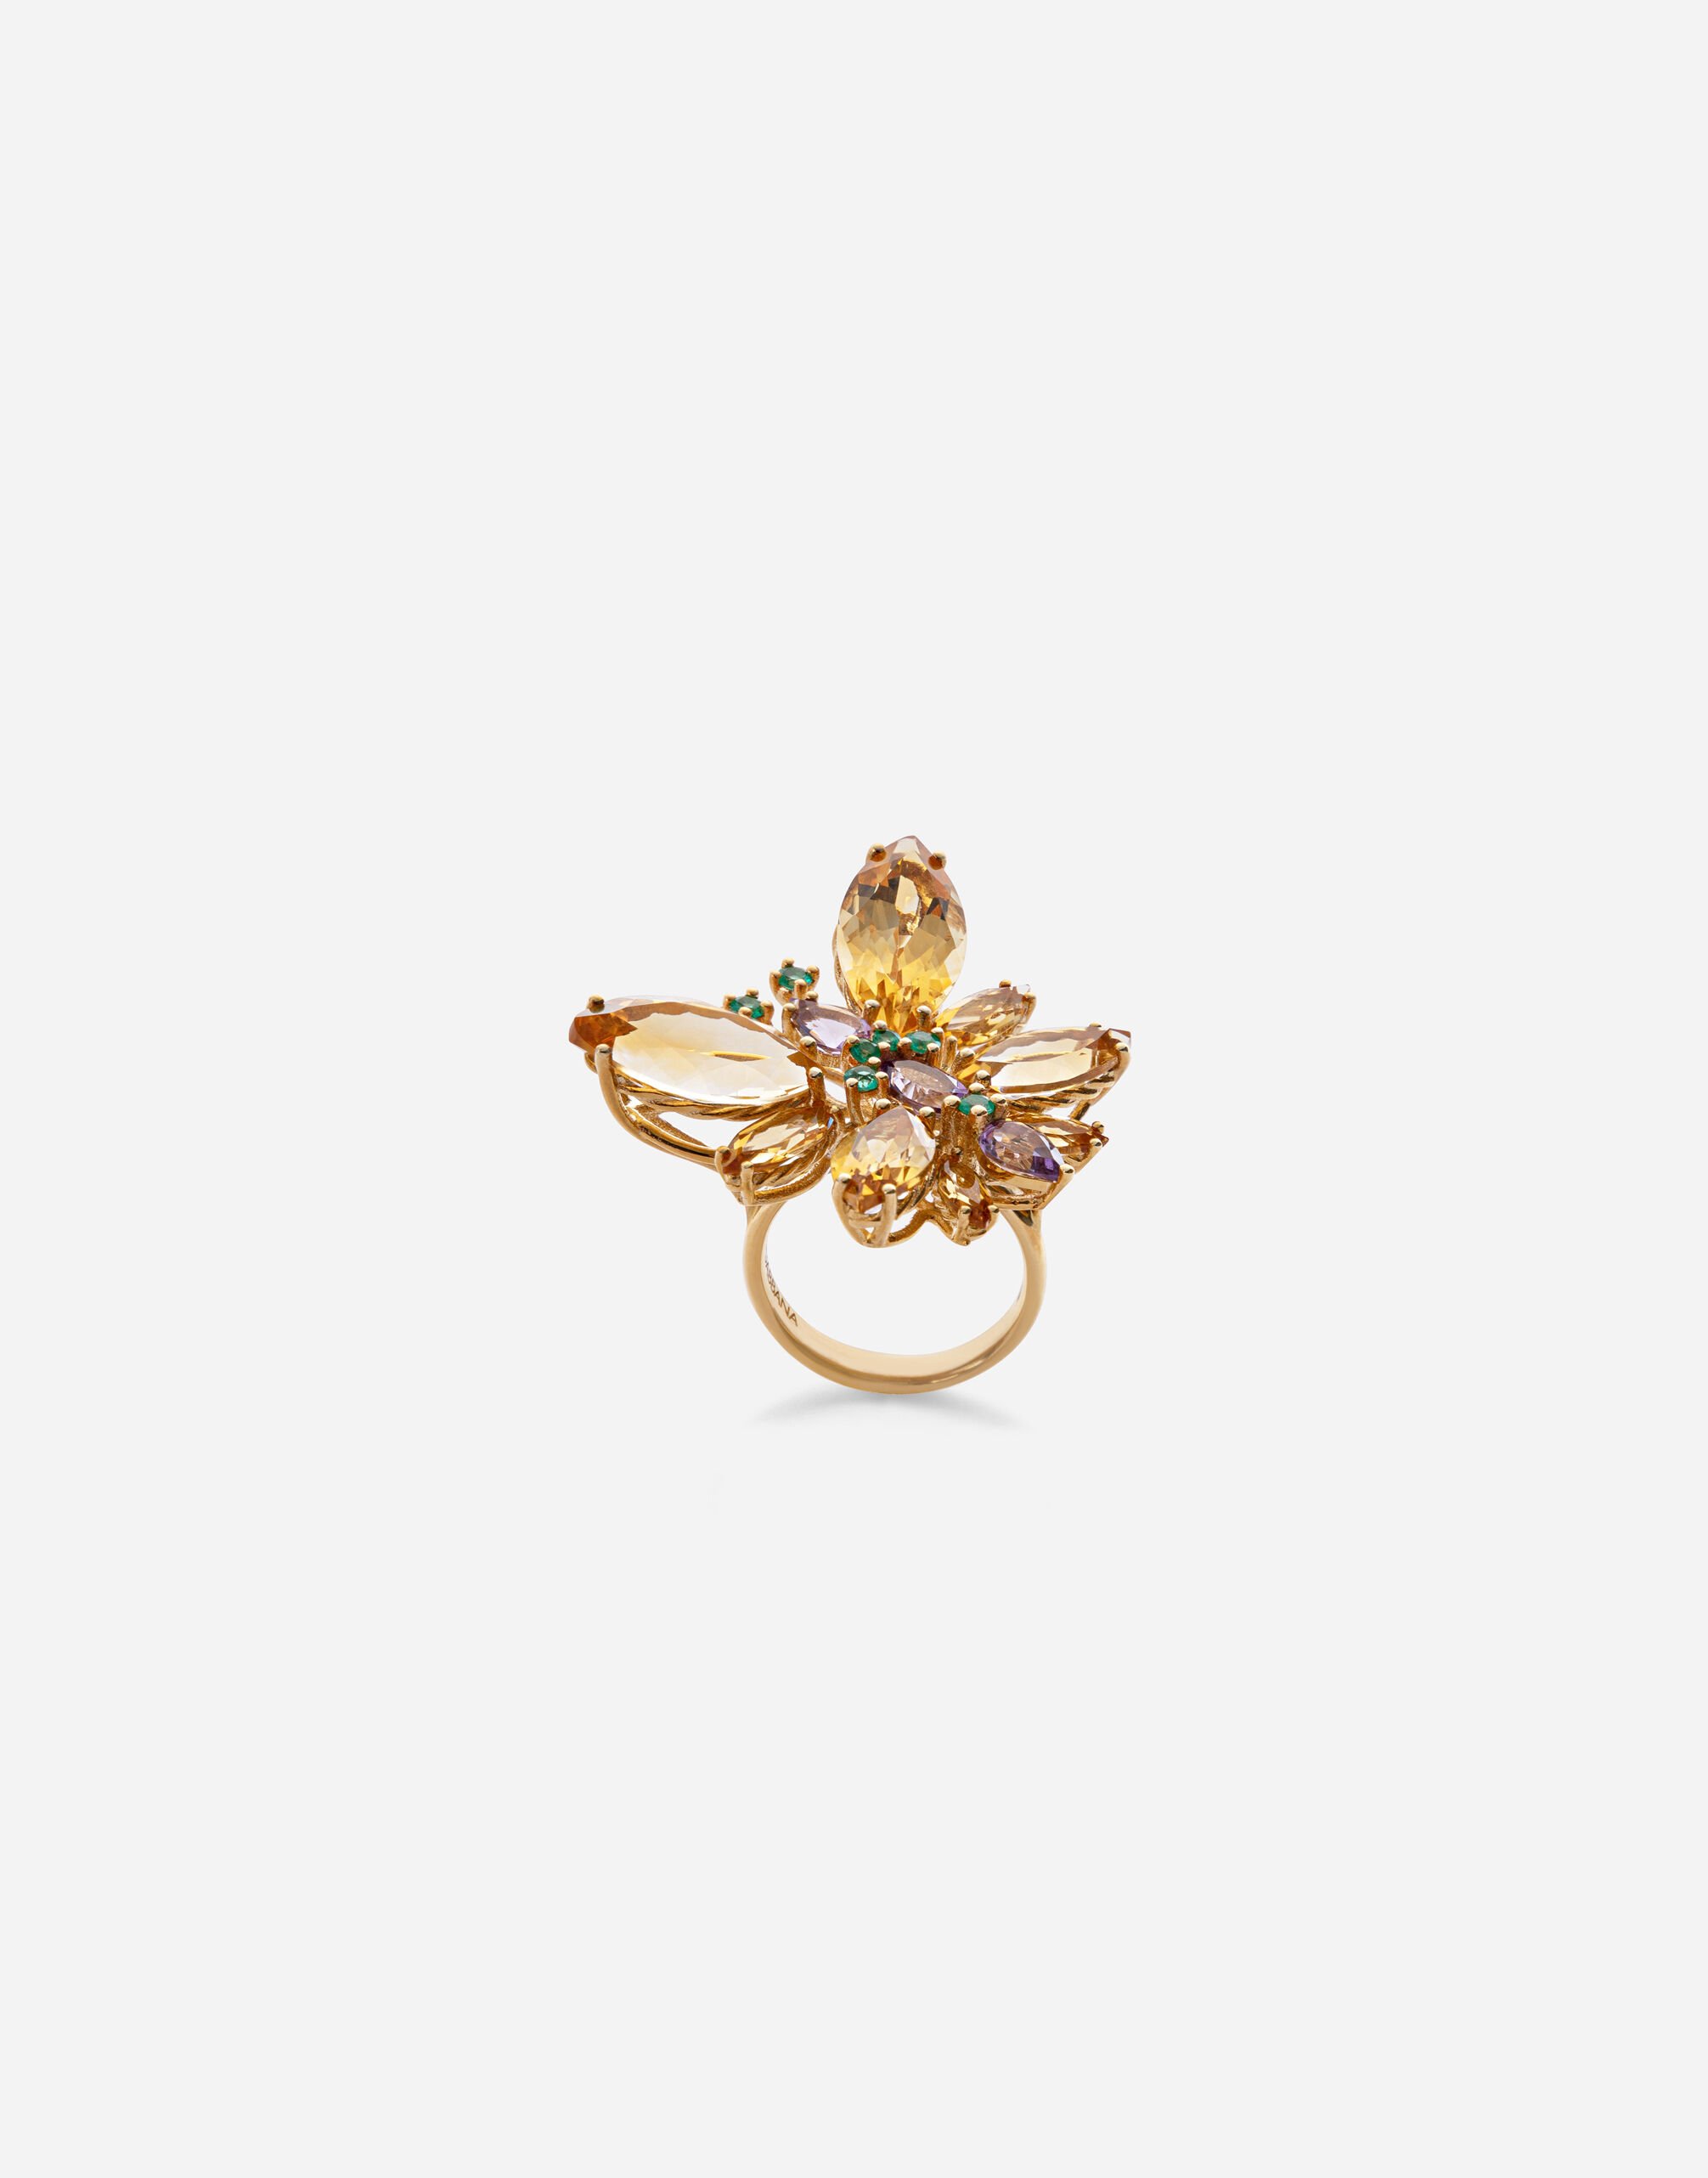 Dolce & Gabbana Spring ring in yellow 18kt gold with citrine butterfly Gold WEJP1GWROD1